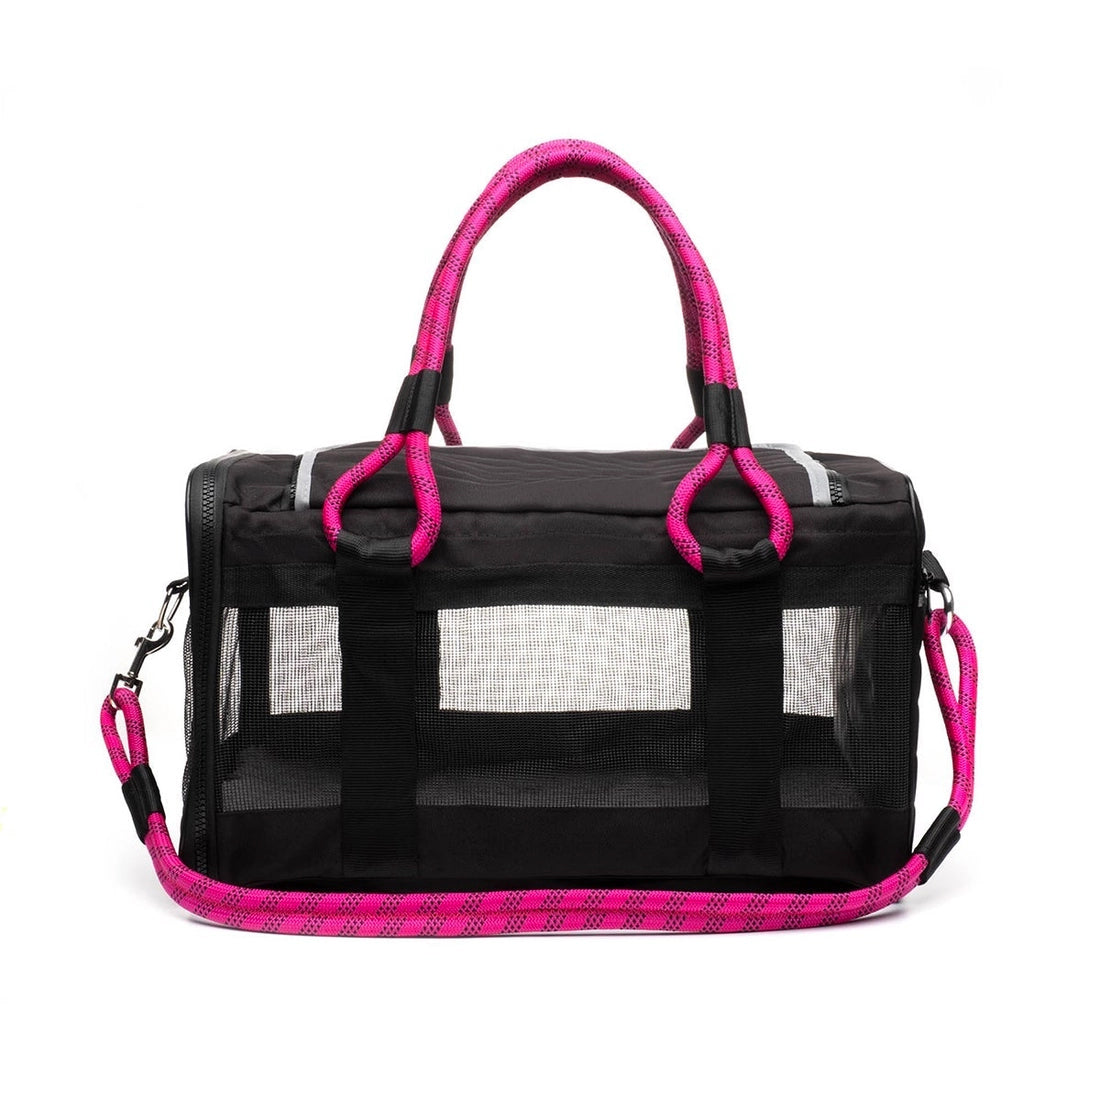 Roverlund Out-of-Office Pet Carrier Black (w/ Magenta) Image